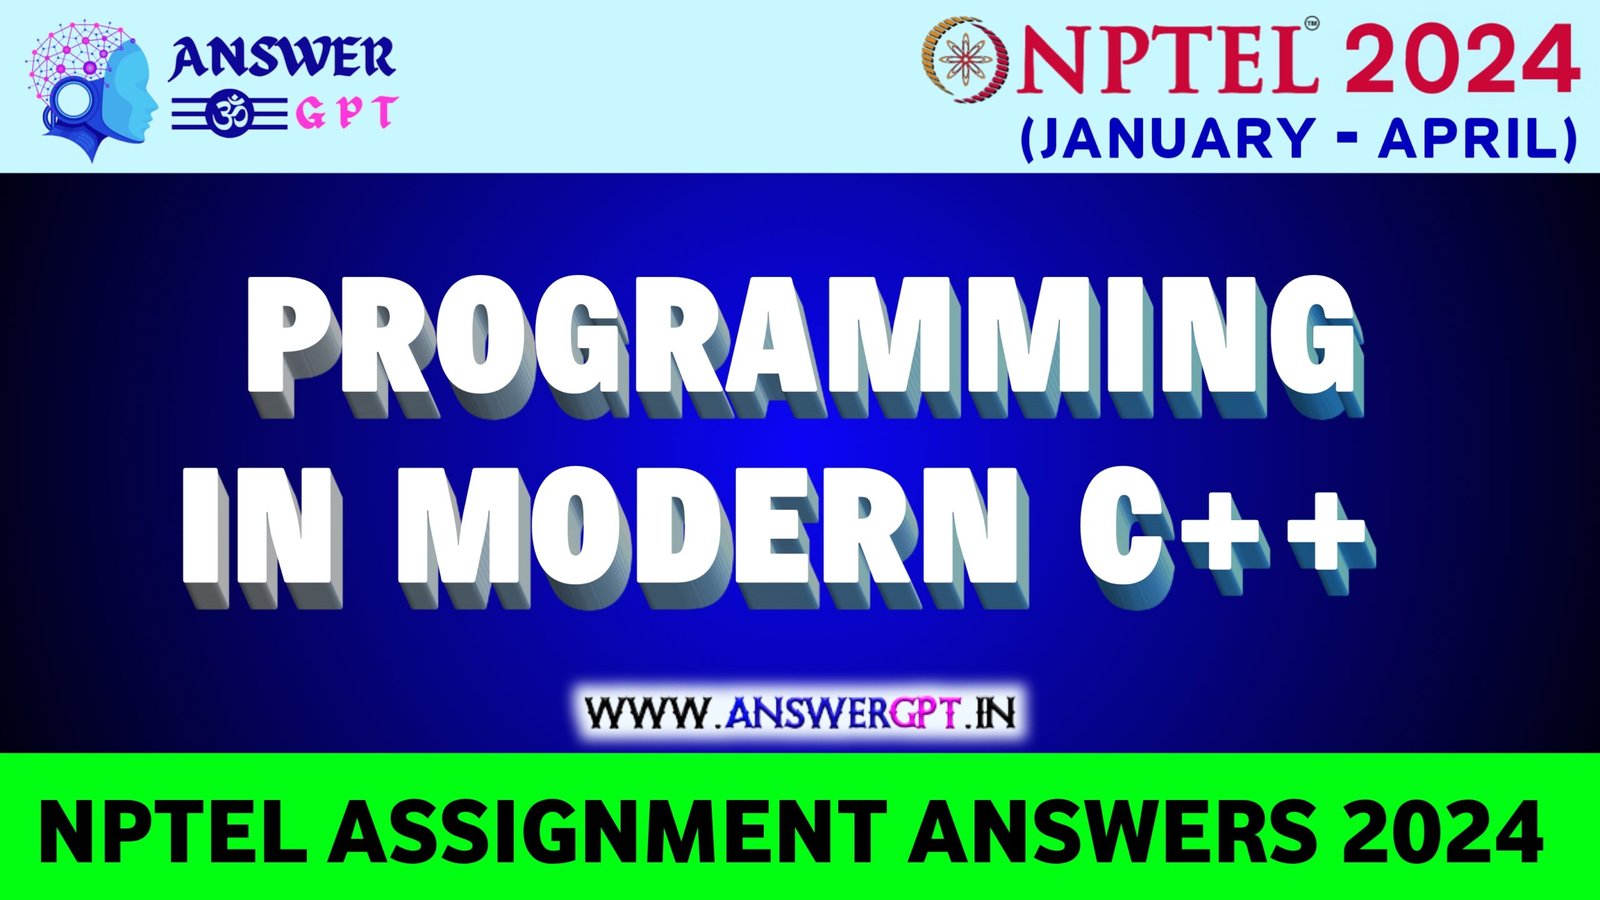 [Week 1-12] NPTEL Programming in Modern C++ Assignment Answers 2024